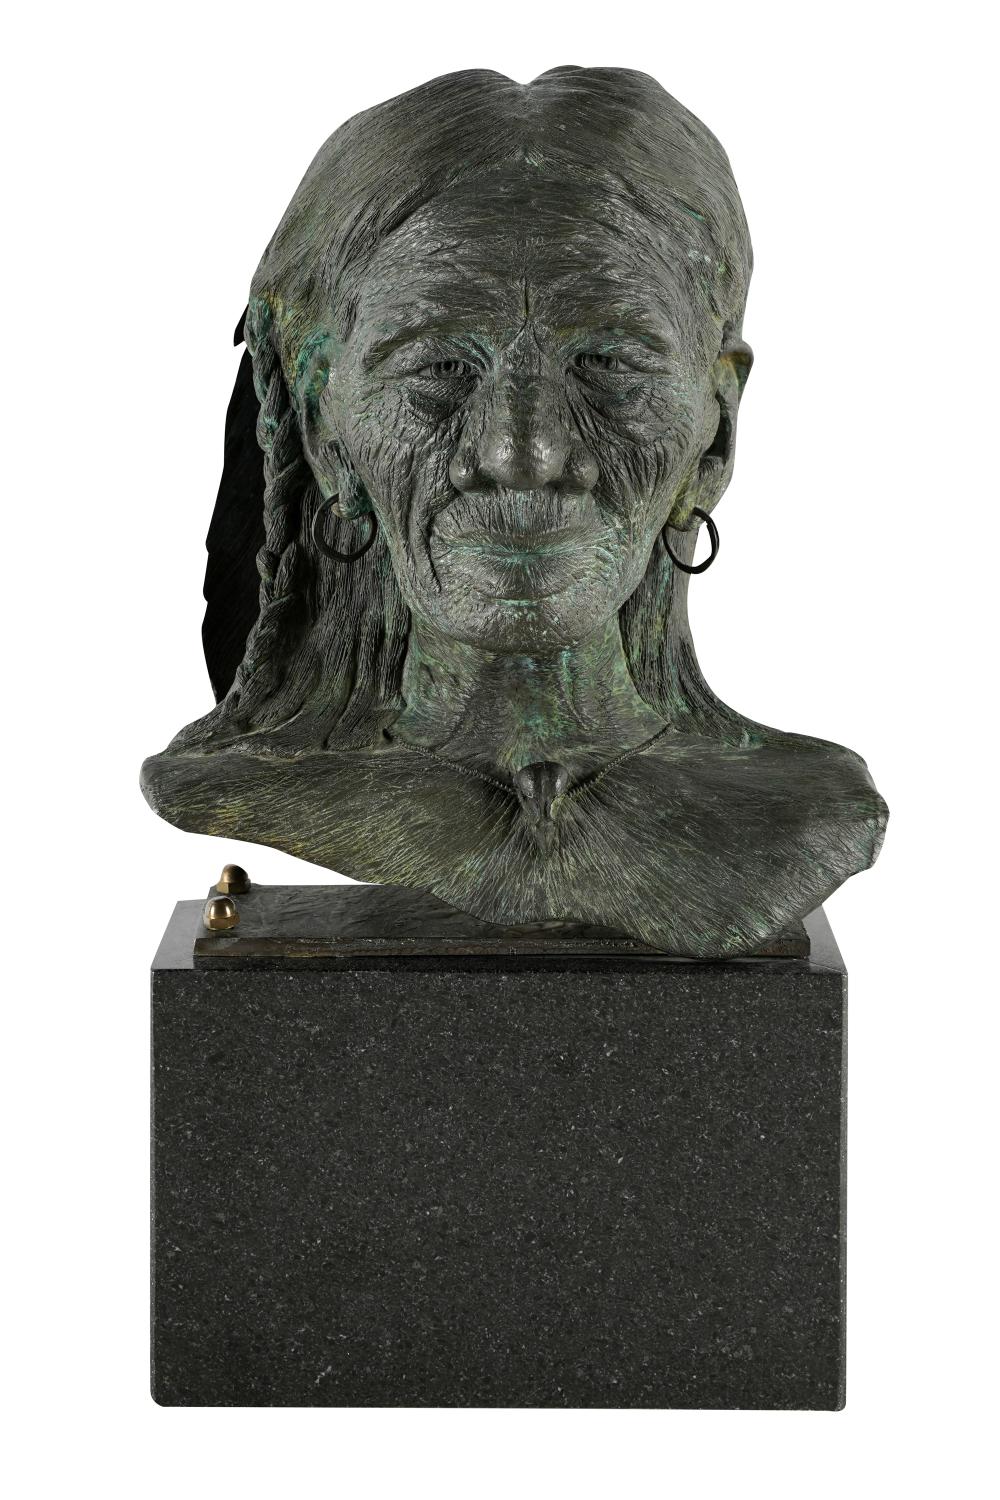 20TH CENTURY: BUST OF A NATIVE